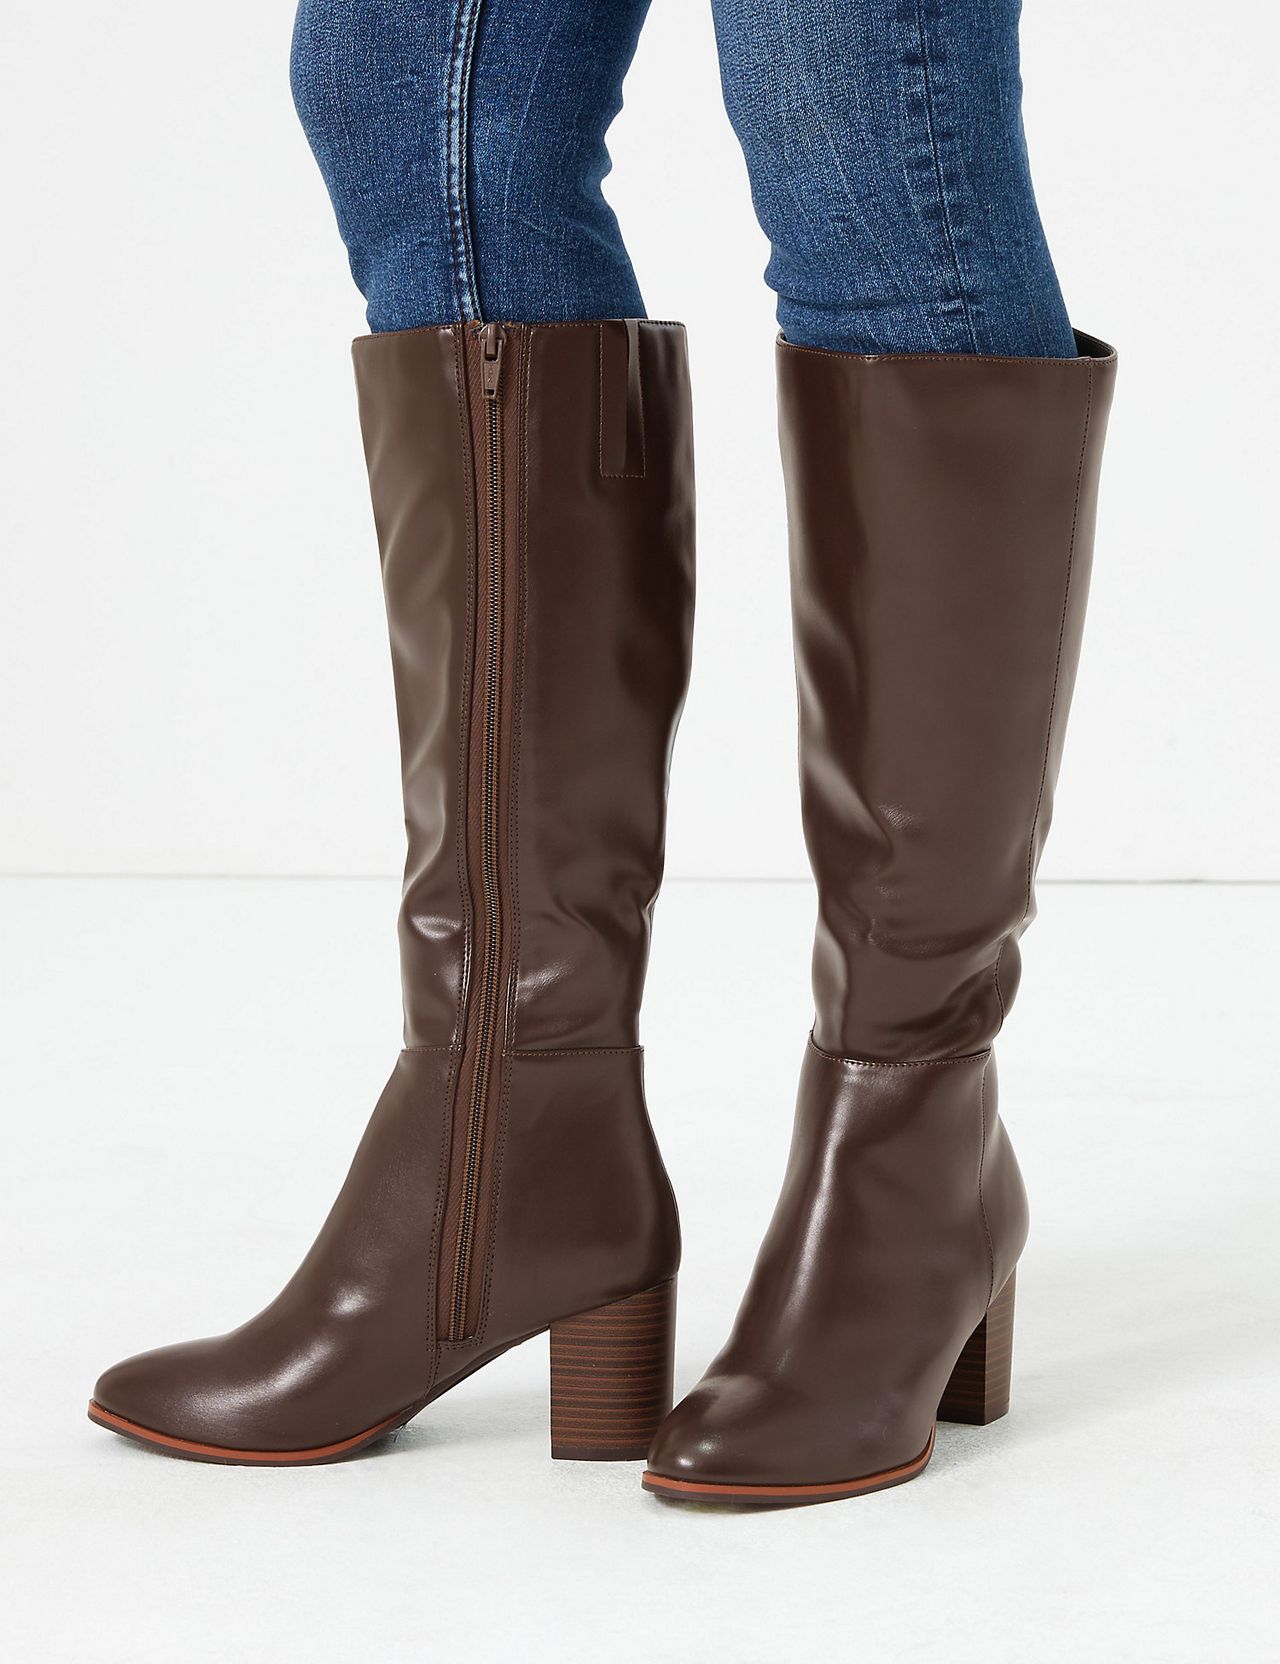 Marks and spencer autumn boots are taking Instagram by storm | Woman & Home